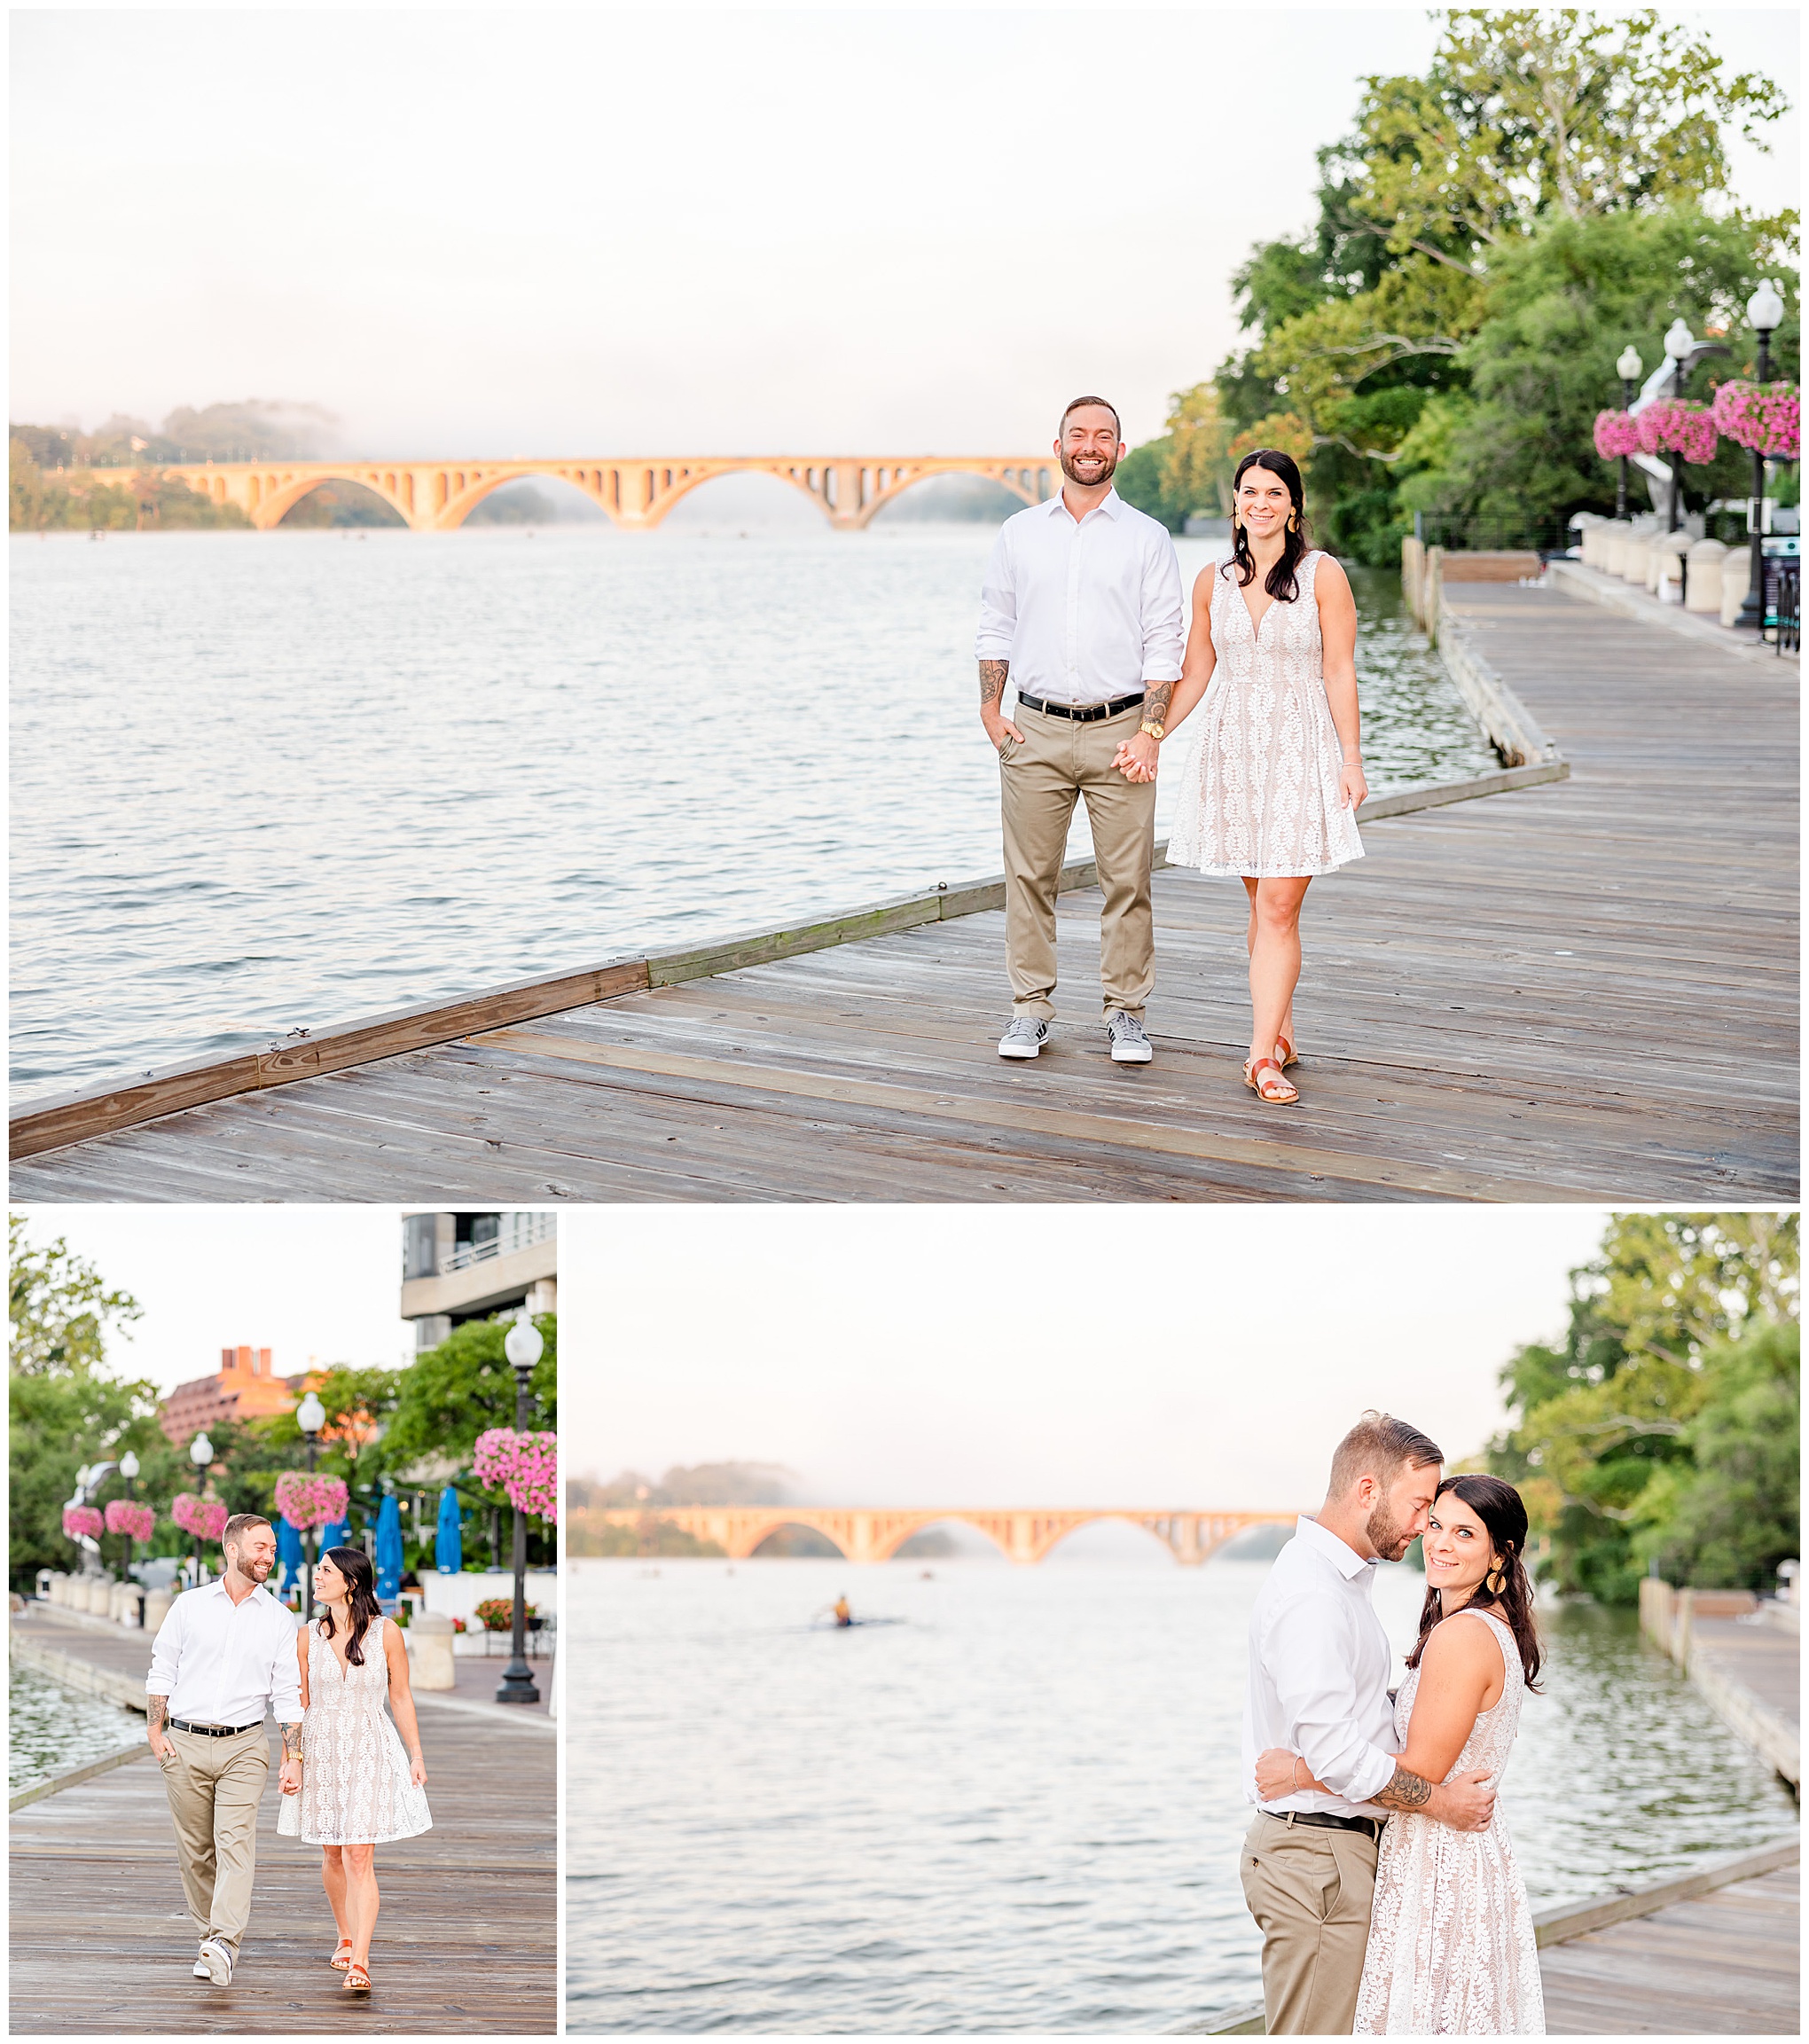 Georgetown waterfront engagement session, Georgetown engagement photos, Georgetown wedding photographer, DC wedding photographer, waterfront engagement photos, Georgetown waterfront engagement photos, DC engagement photos, Rachel E.H. Photography, summer engagement photos, couple on boardwalk, couple holding hands, couple looking at each other, couple in front of bridge